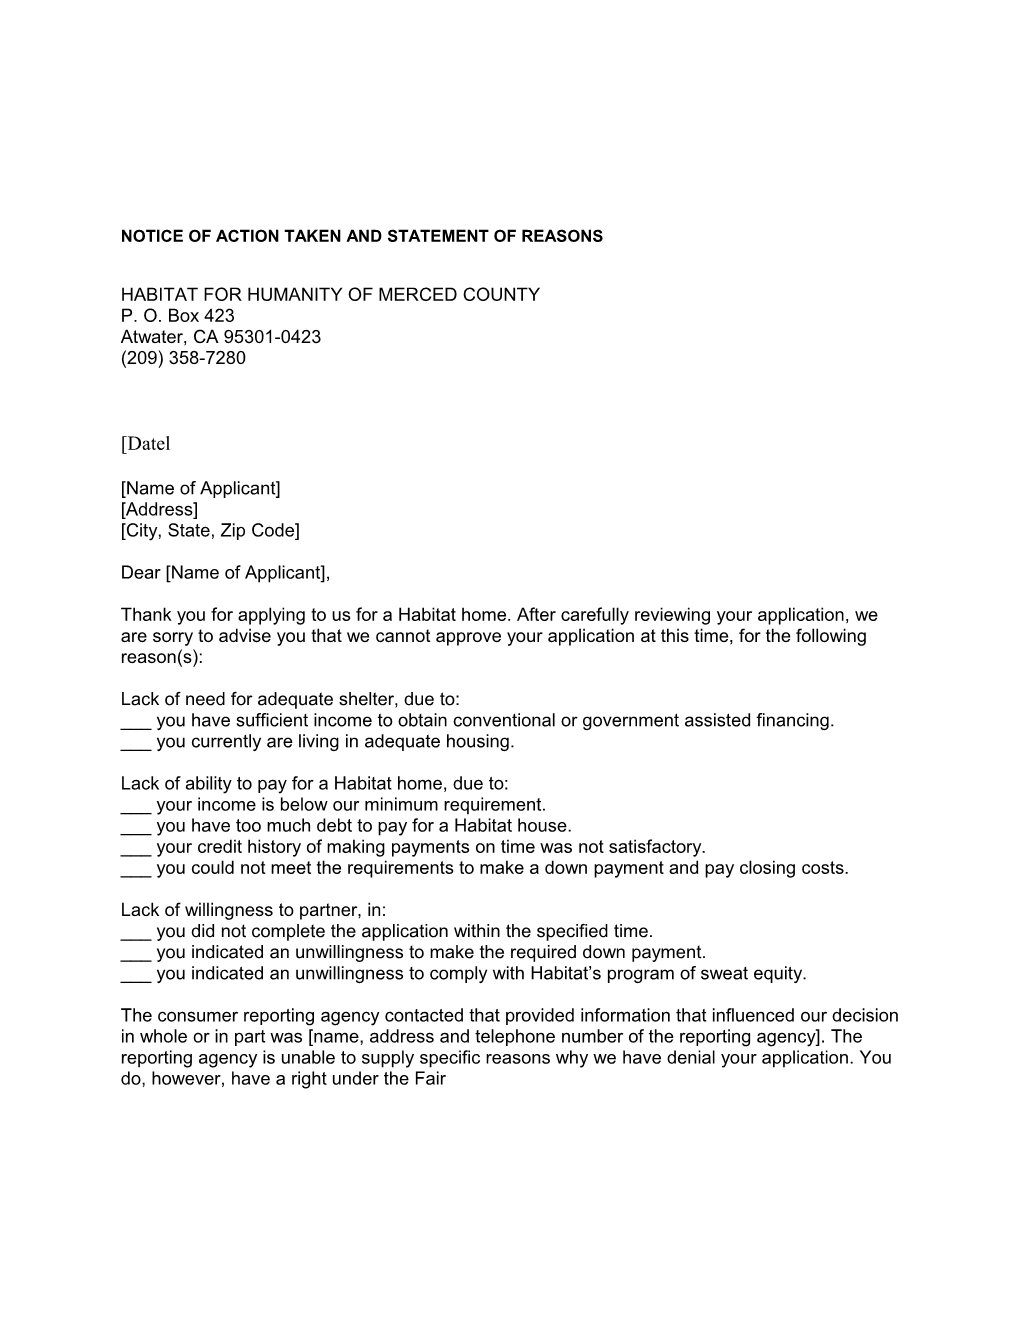 Notice of Action Taken and Statement of Reasons